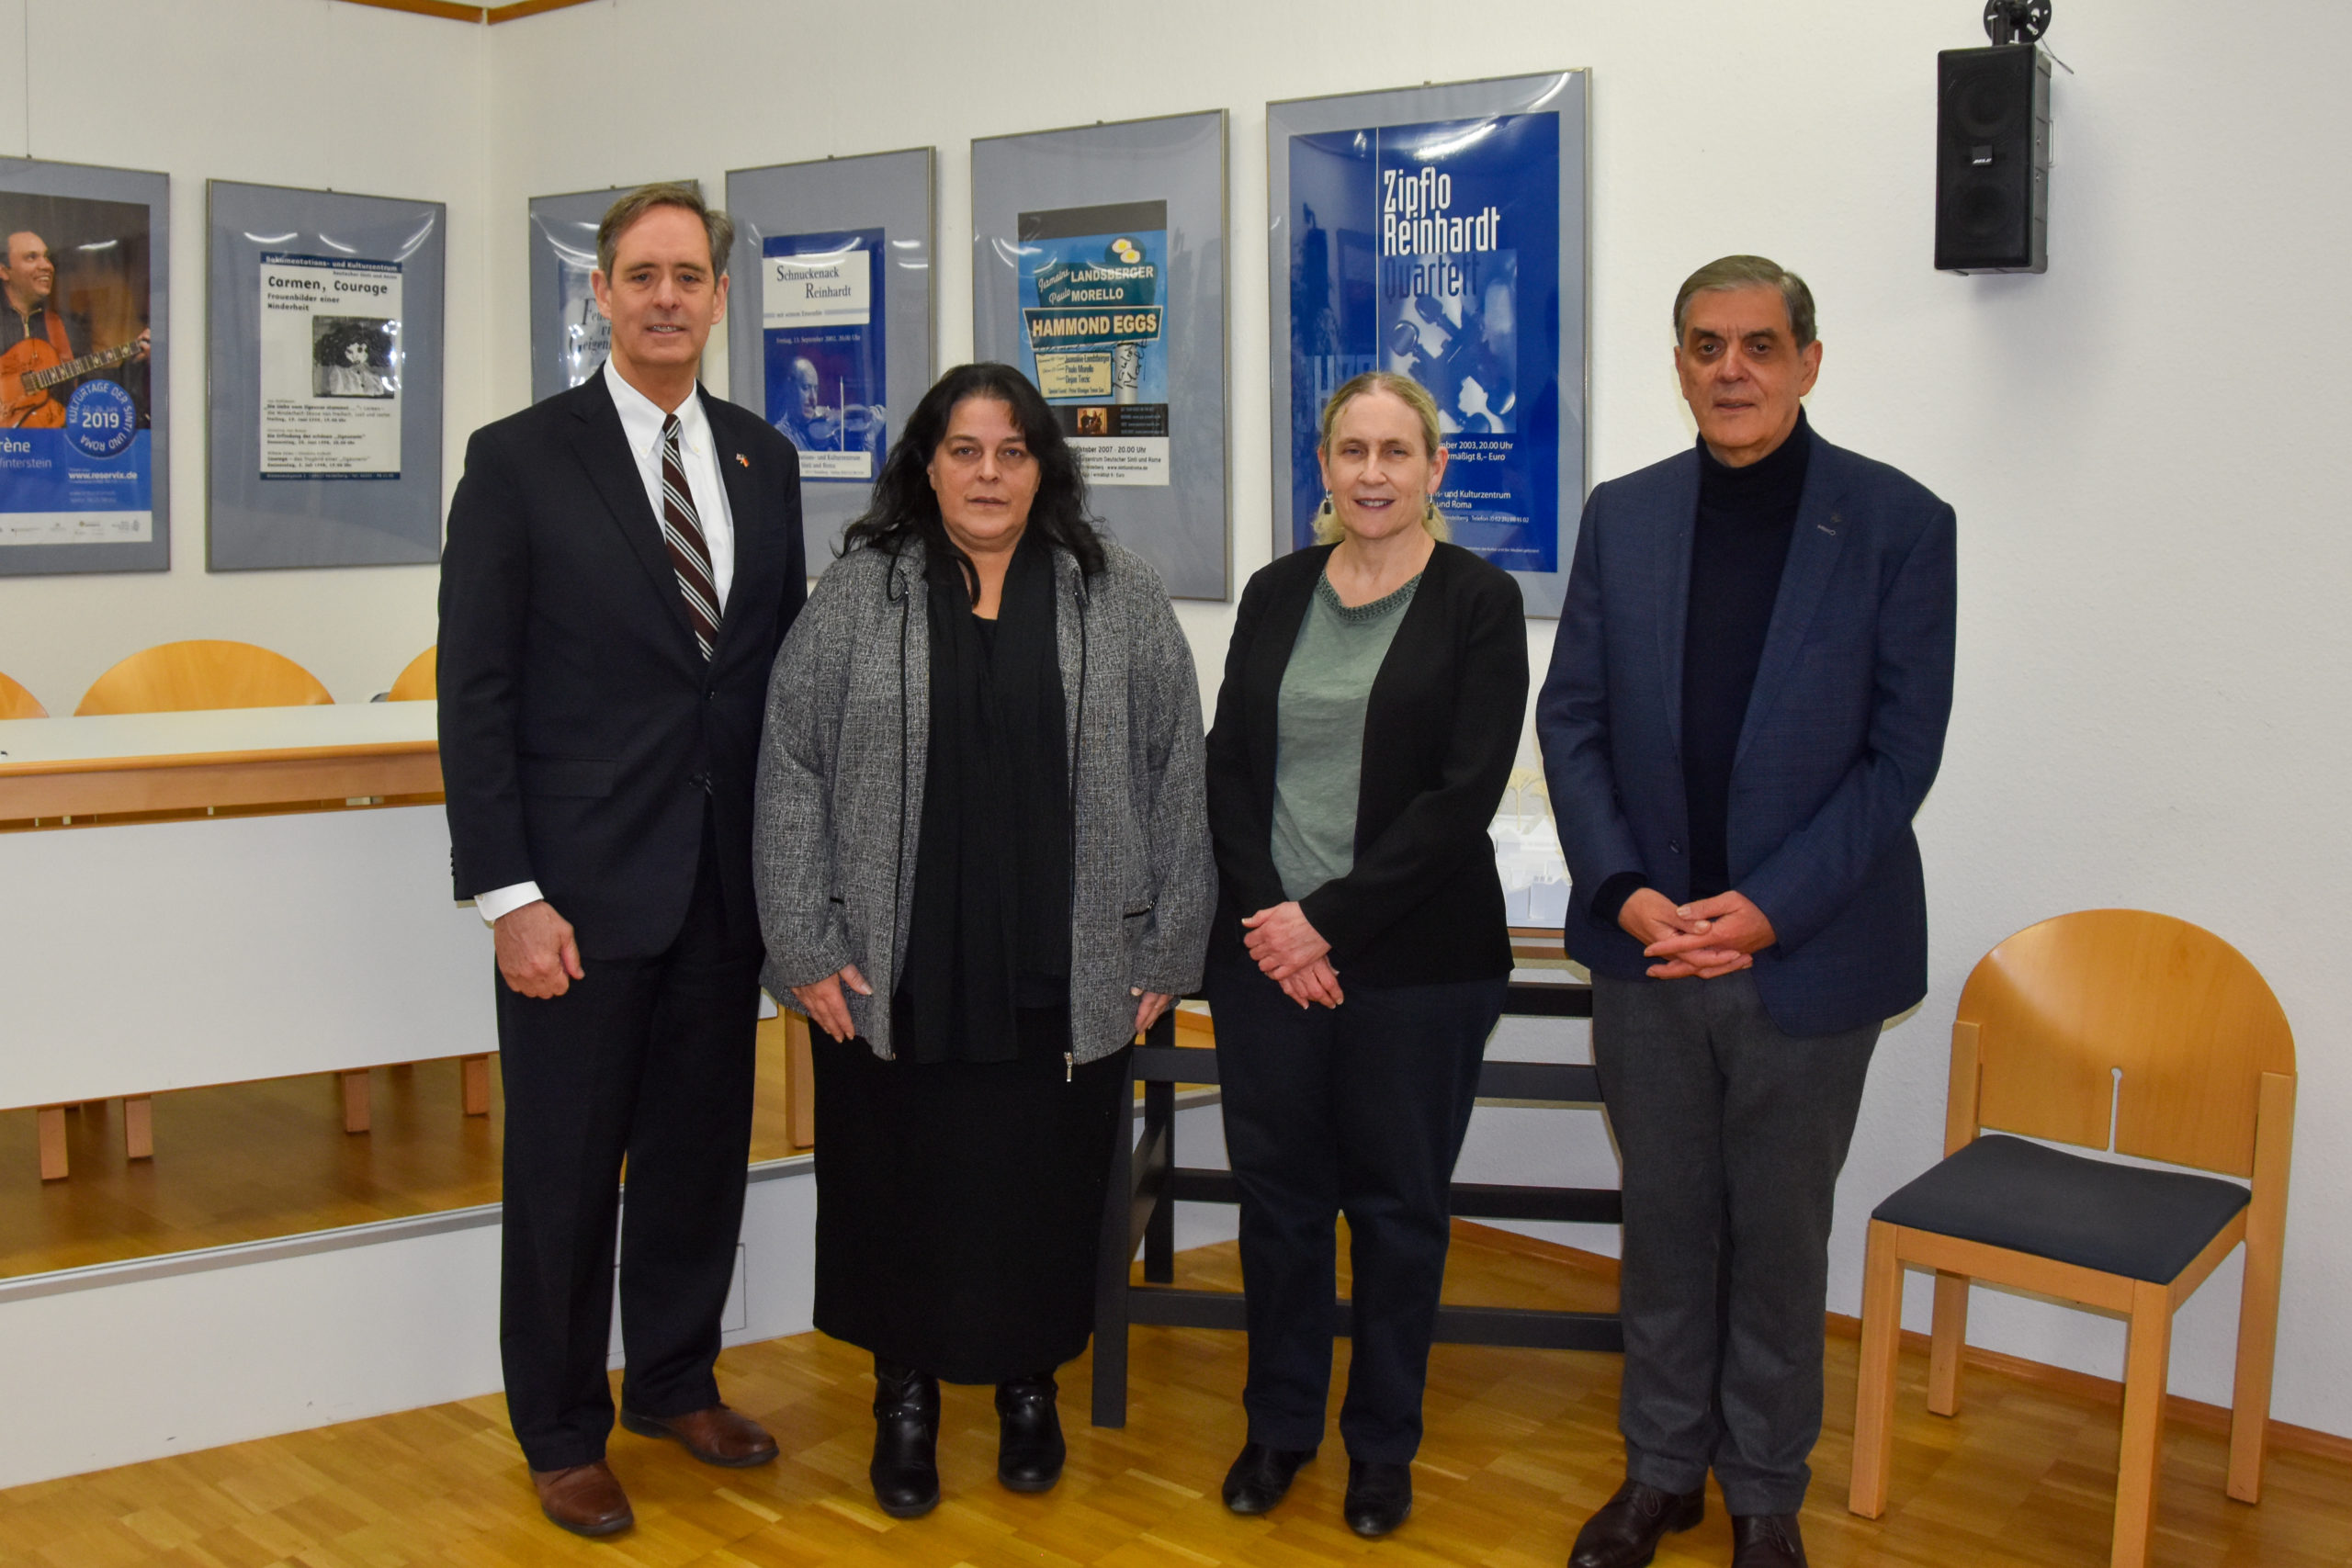 From left to right: Consul General Norman Thatcher Scharpf, Diana Bastian, Ambassador Ellen Germain and Romani Rose stand next to each other and look into the camera. In the background, a small stage with posters from the Documentation Center's event program can be seen.